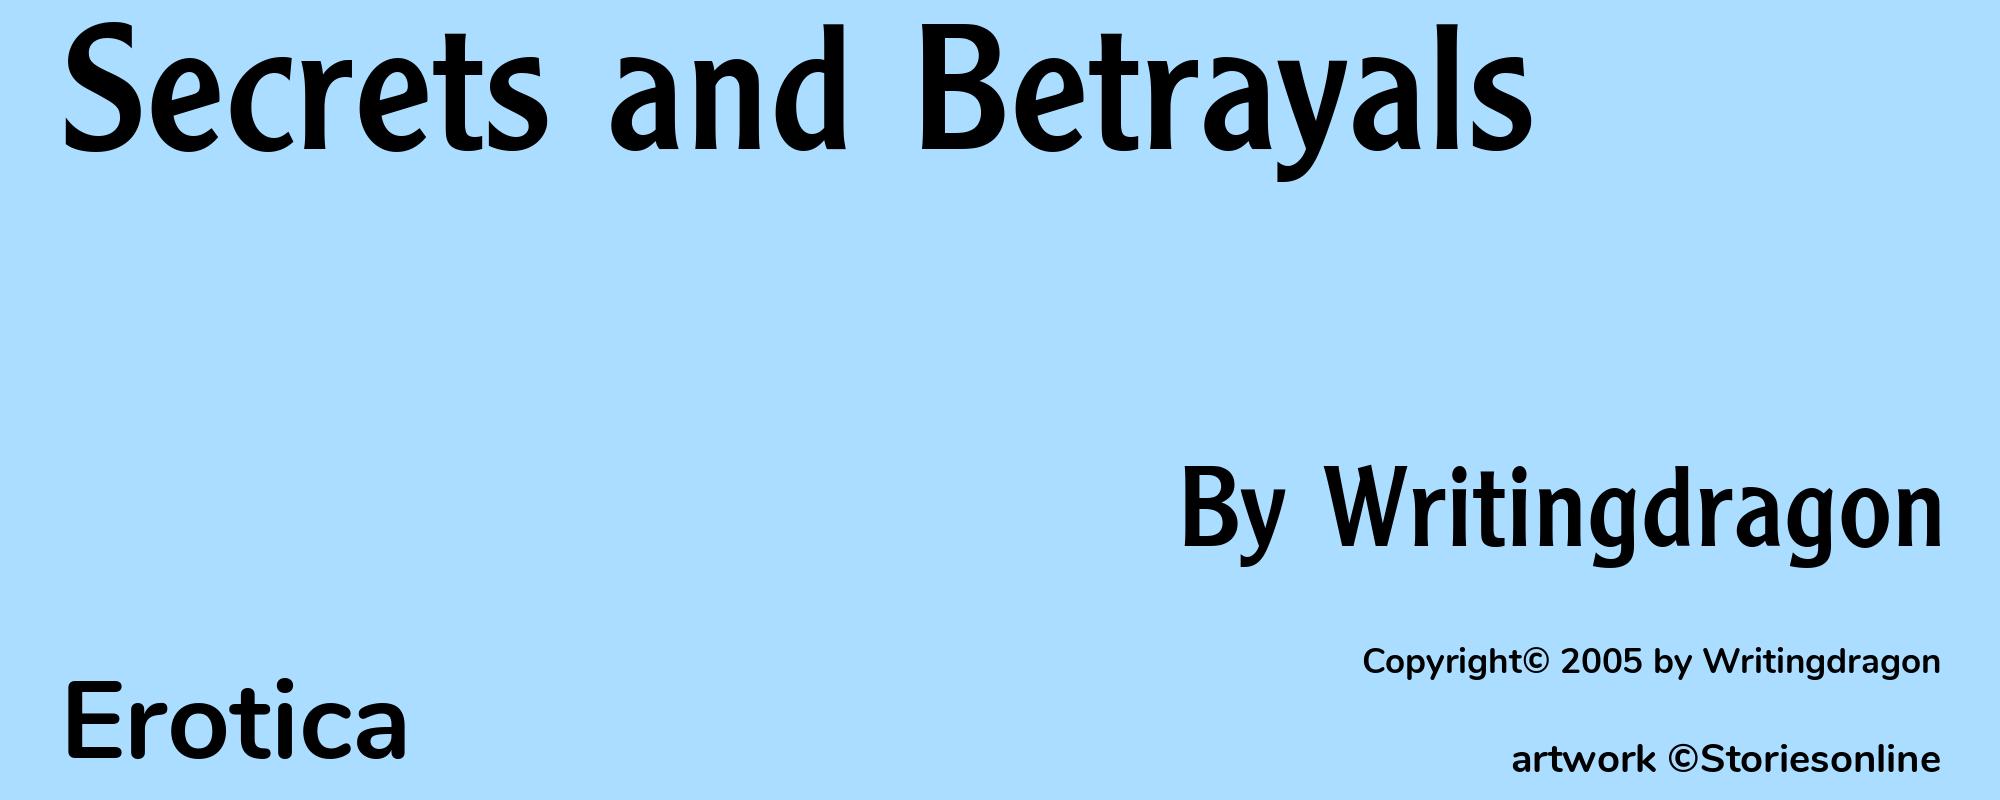 Secrets and Betrayals - Cover